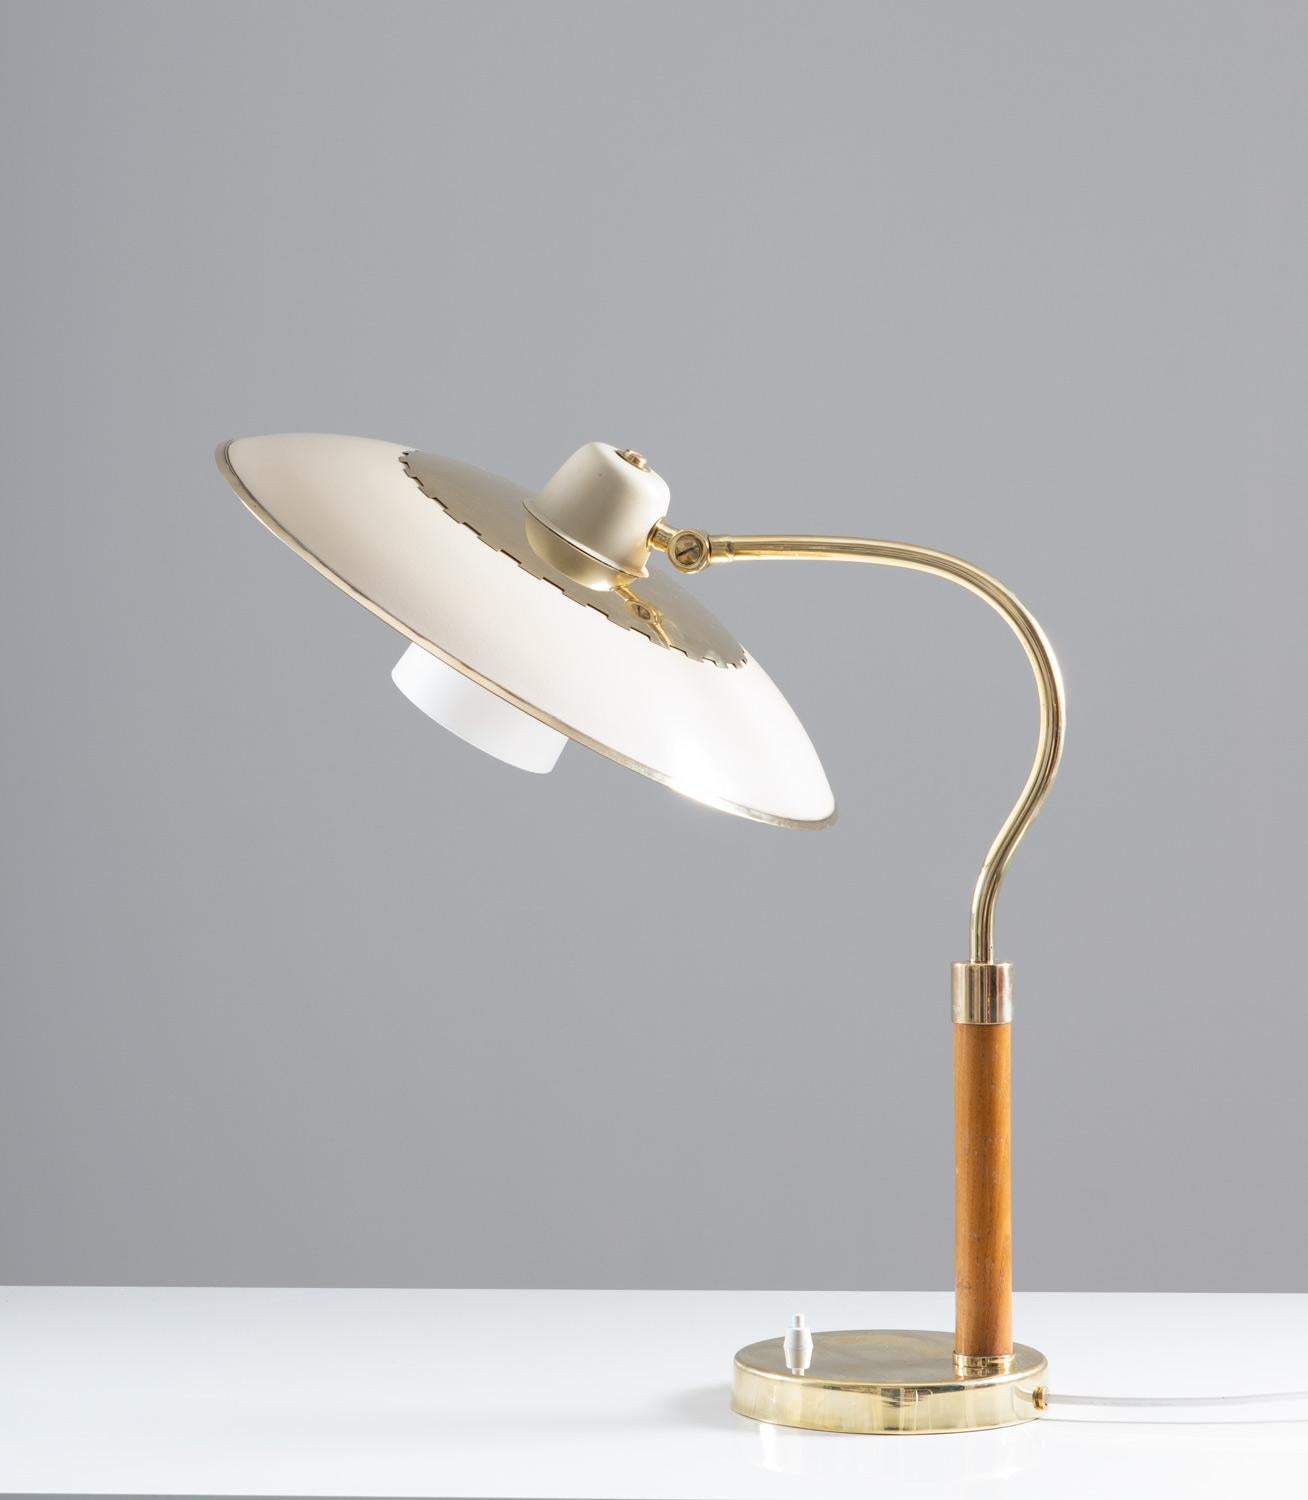 Swedish Mid-Century Modern table lamp in brass, glass and wood, produced by Boréns, 1940´s.
The lamp consists of a large white painted shade, decorated with details of pollished brass. The bulb is surrounded by a second shade of frosted opaline